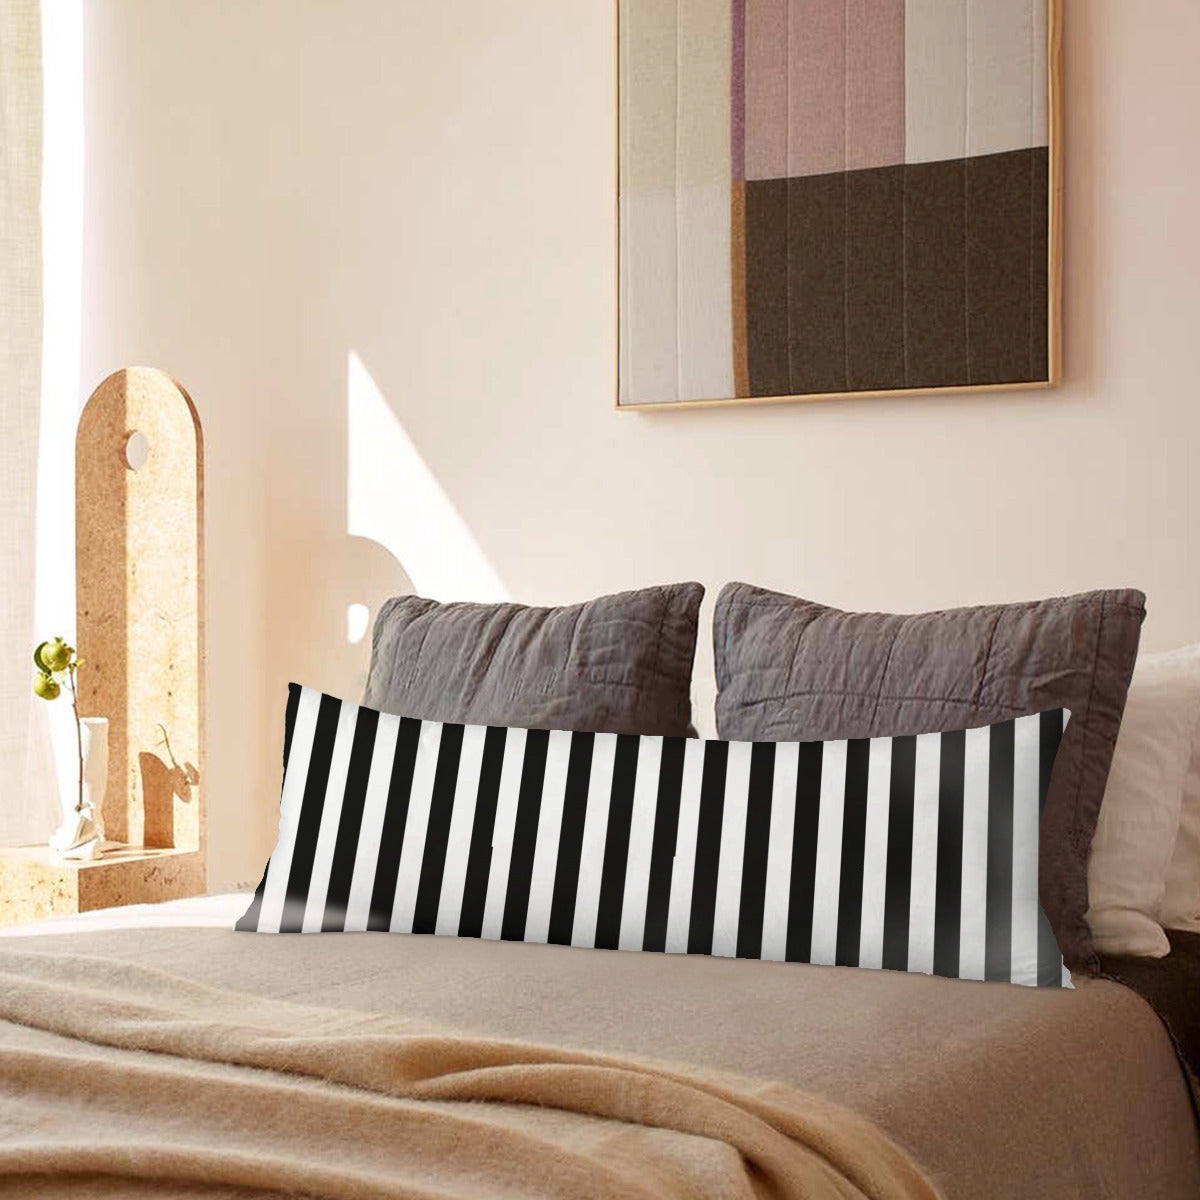 Long Pillow Cover Double-Sided Design stripes black and white Home-clothes-jewelry